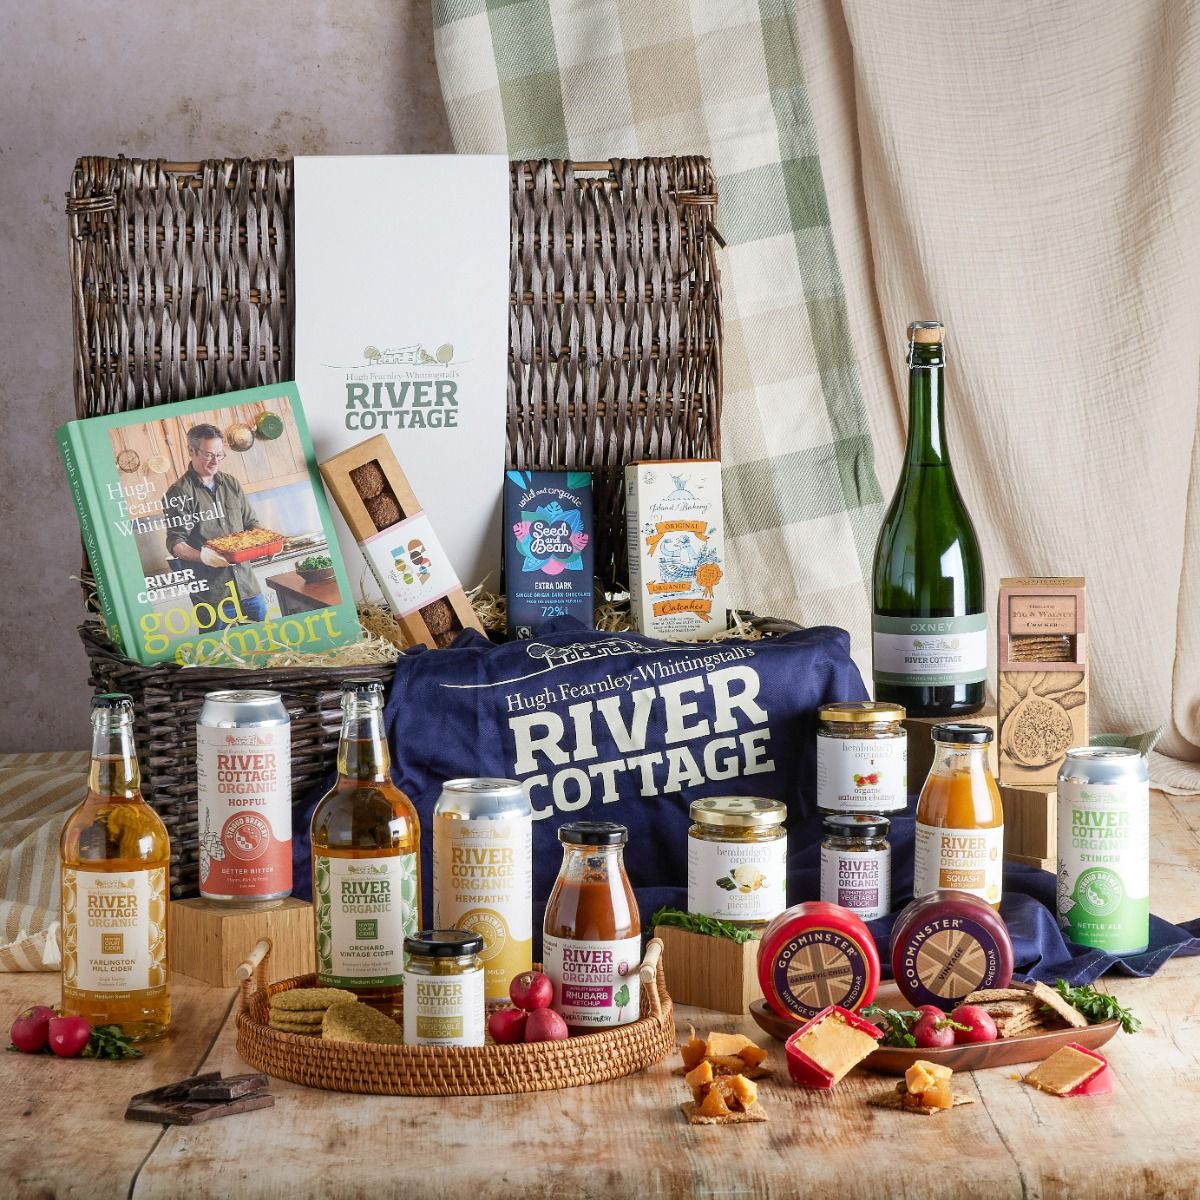 The River Cottage Hamper with contents on display